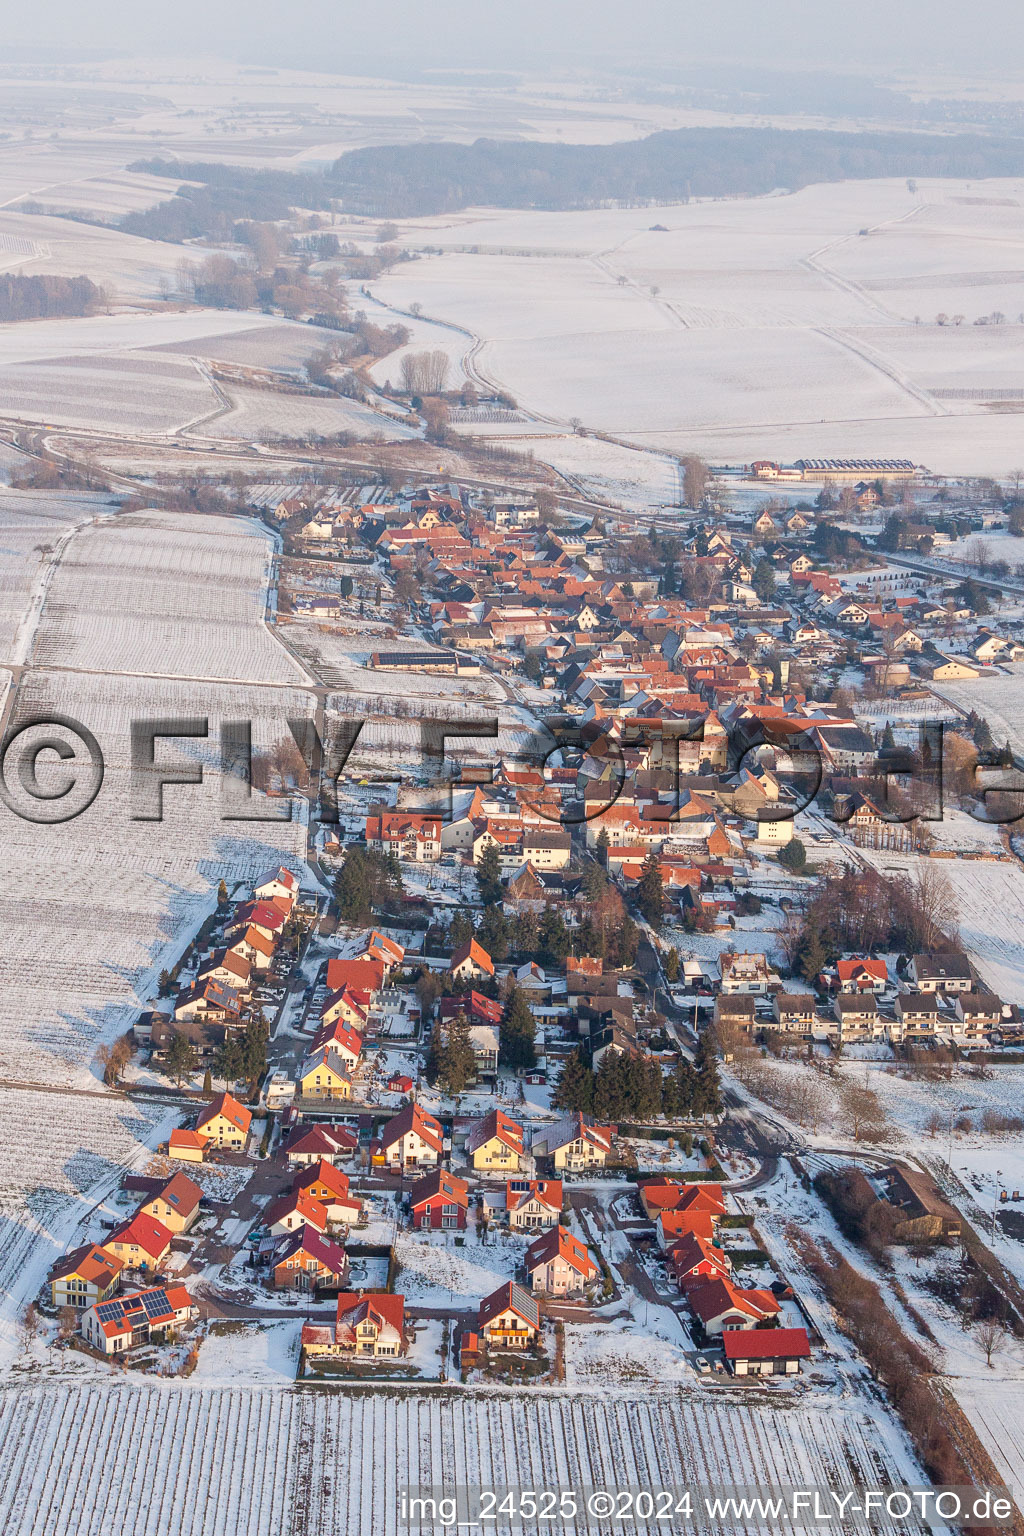 Wintry snowy Village - view on the edge of agricultural fields and farmland in Niederhorbach in the state Rhineland-Palatinate, Germany